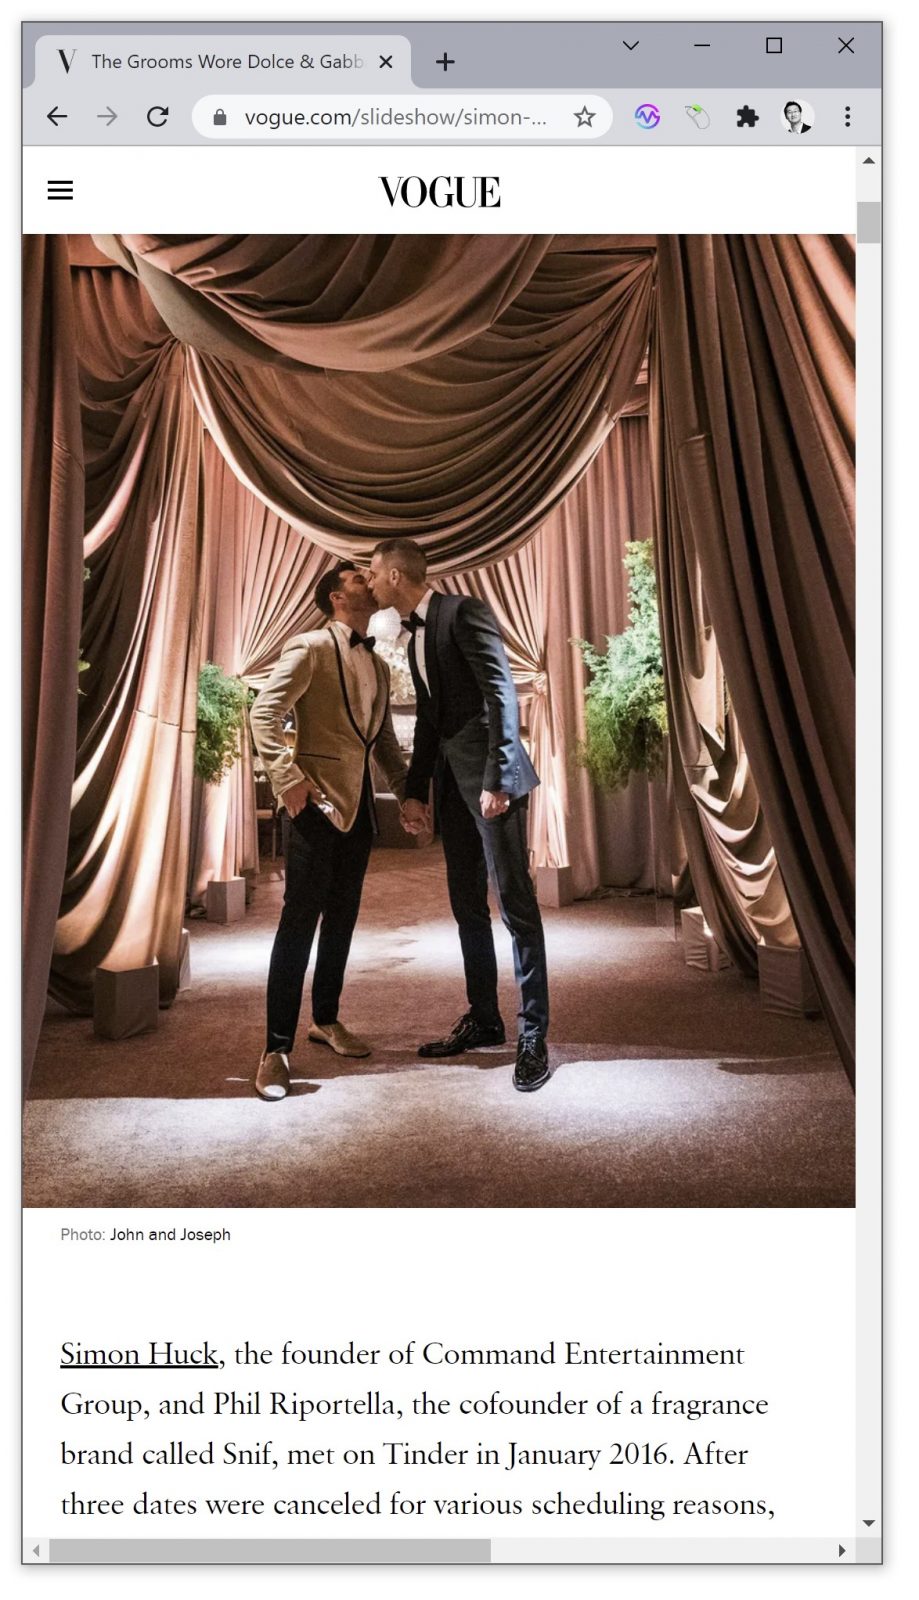 Simon Huck and Phil Riportella's Wedding published in Vogue as an exclusive.